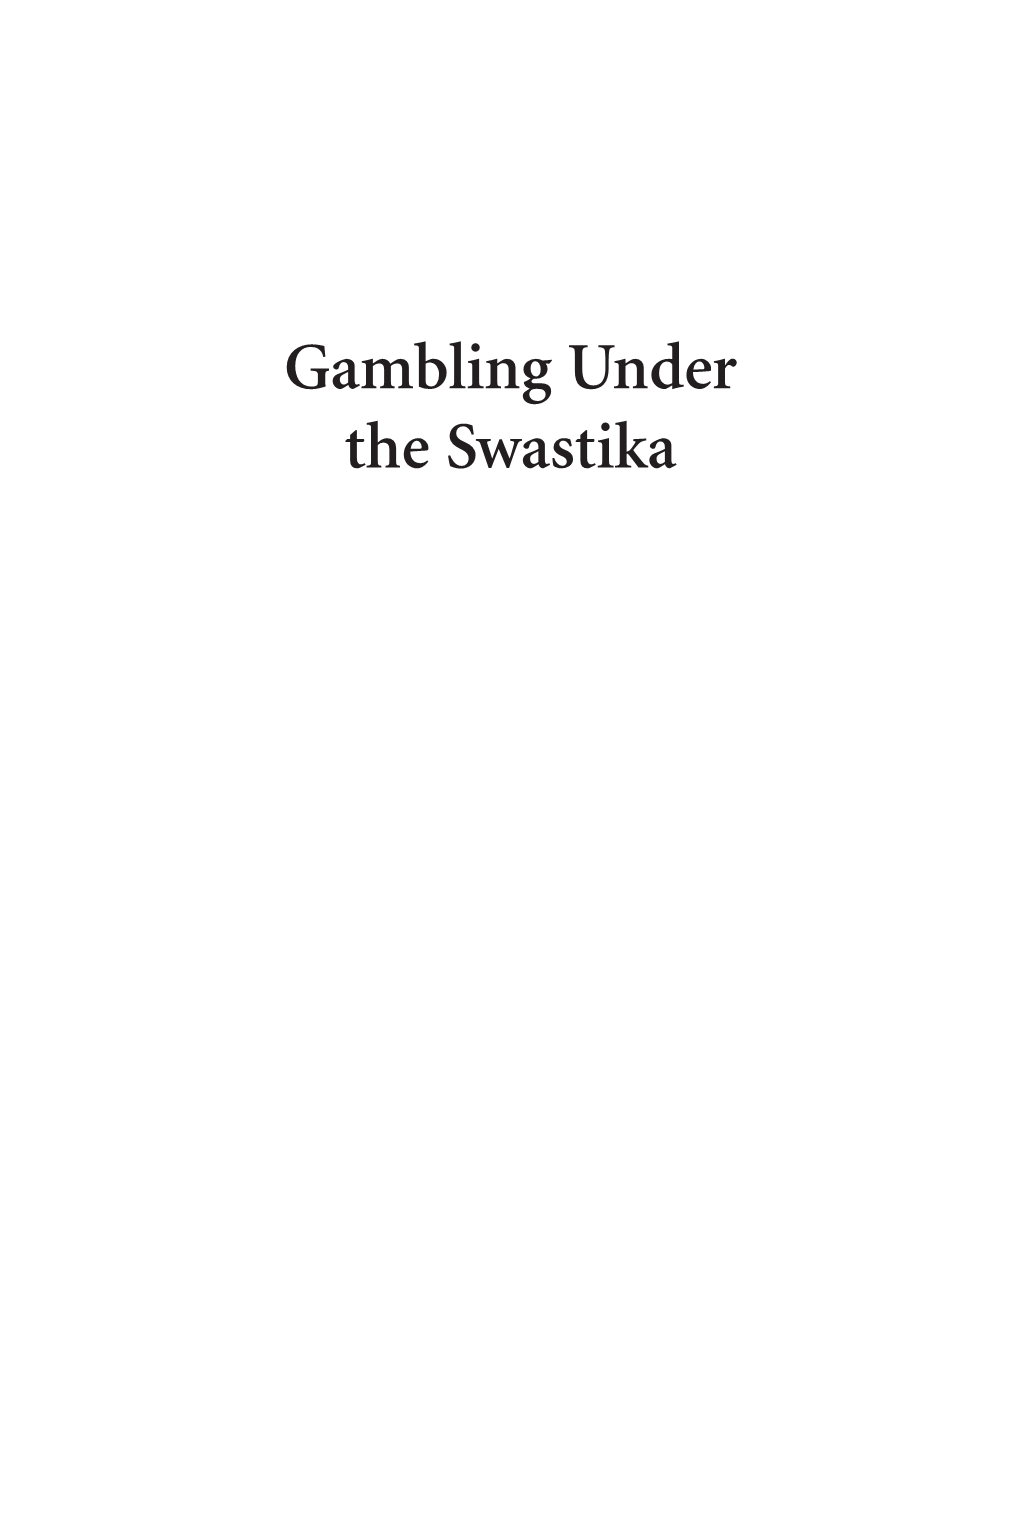 Gambling Under the Swastika Jarvis 00 Fmt.Qxp 1/15/19 11:39 AM Page Ii Jarvis 00 Fmt.Qxp 1/15/19 11:39 AM Page Iii